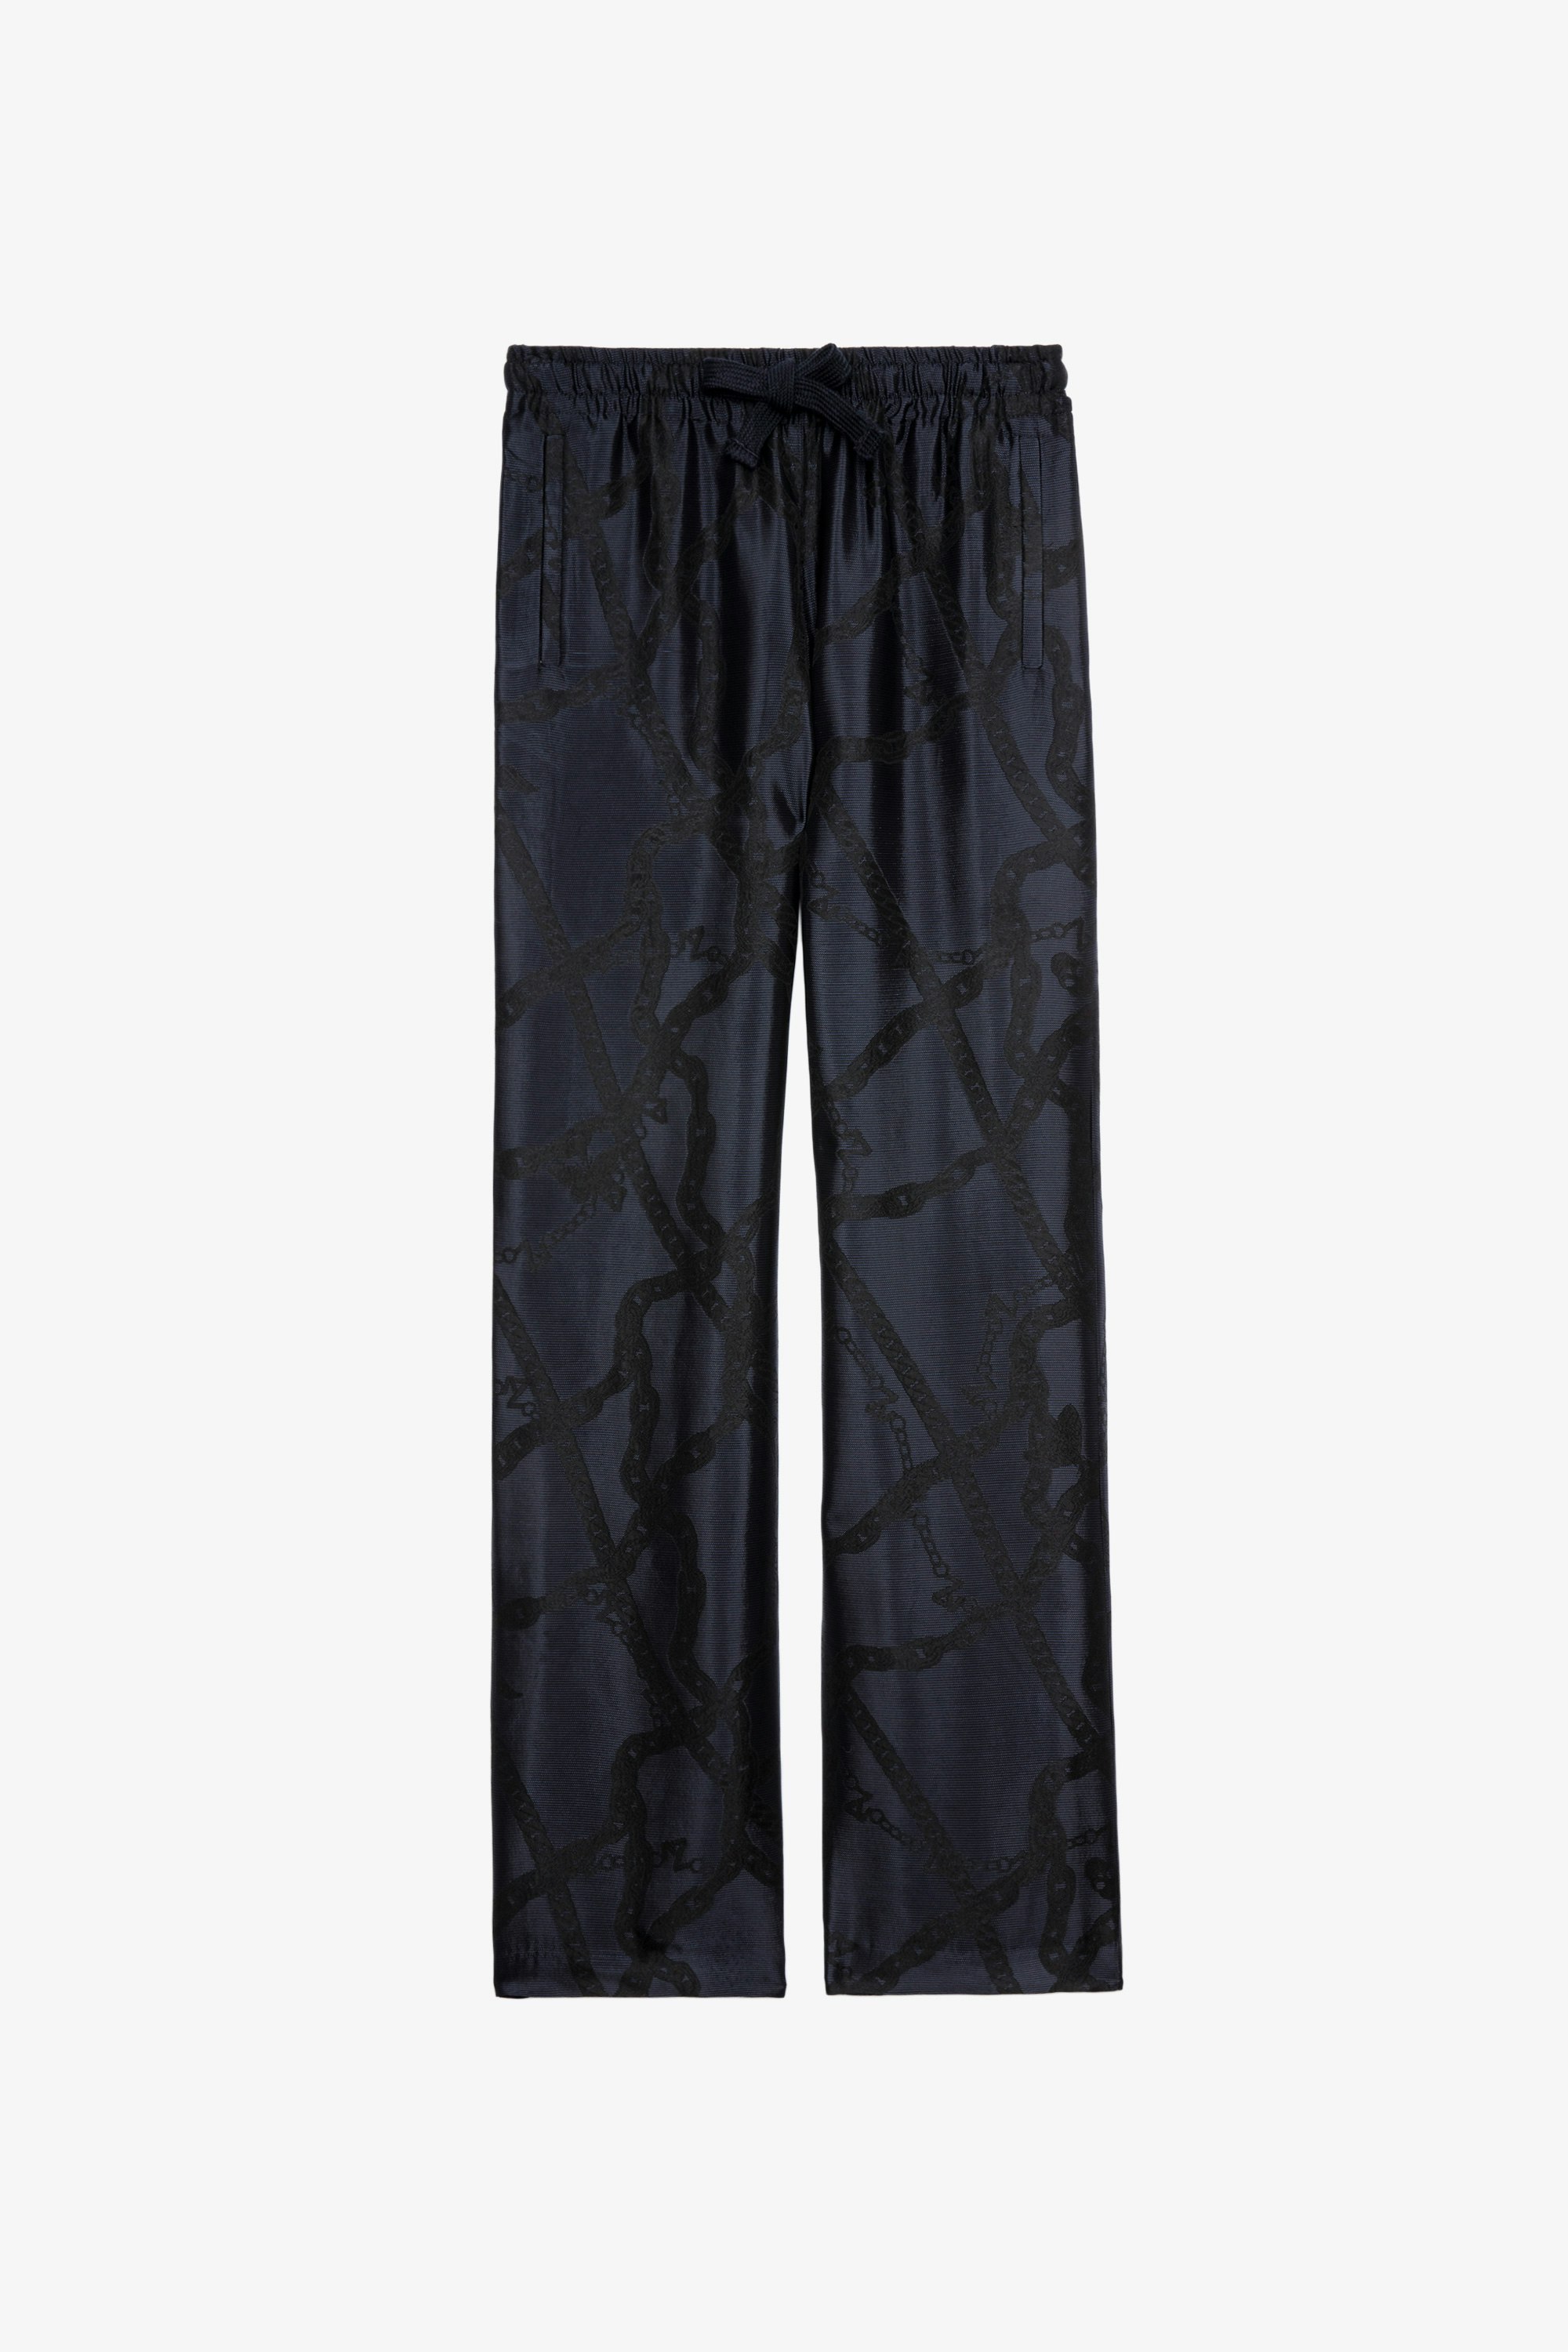 Pomy Jac Chains パンツ Women's navy blue satiny trousers with jacquard detailing 